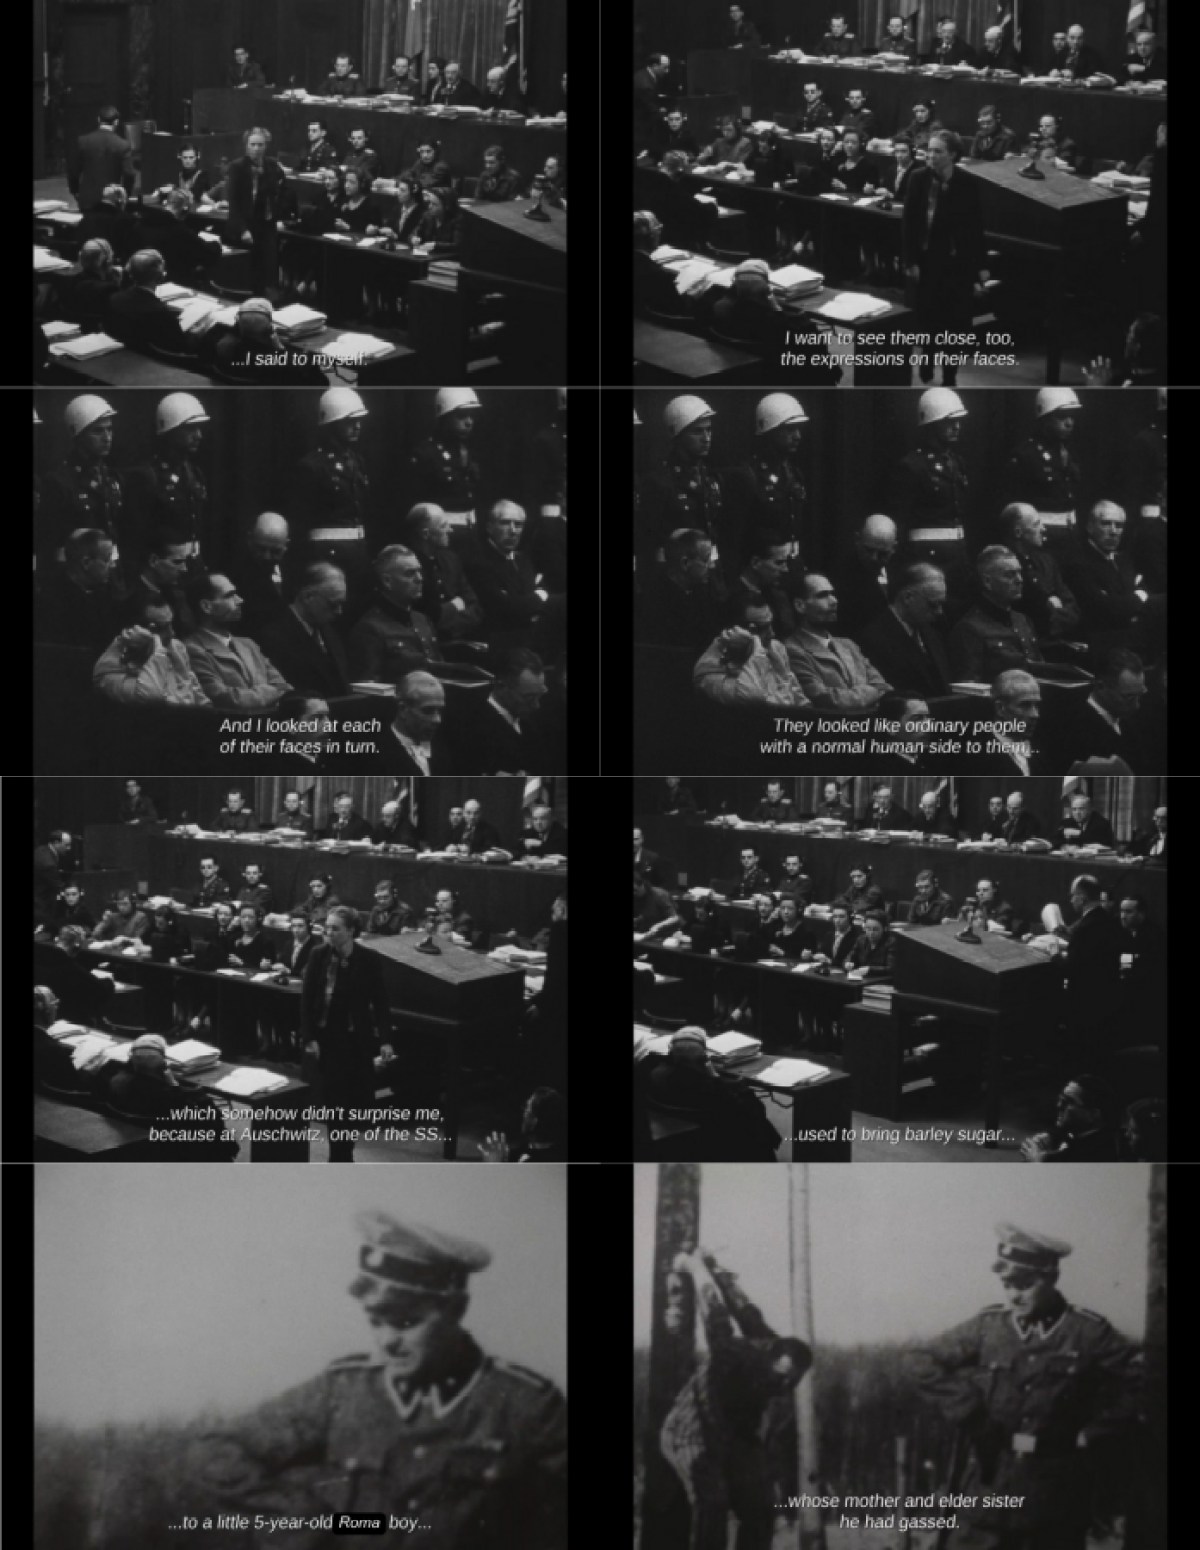 The Memory of Justice: Eight screenshots, the first six from the Nuremberg trial, the second two of a Nazi next to a man hung on a fence. CC: I said to myself I want to see them close, too, the expressions on their faces. And I looked at each of their faces in turn. They looked like ordinary people with a normal human side to them which somehow didn't surprise me because at Auschwitz one of the SS used to bring barley sugar to a little 5 year old Roma boy whose mother and elder sister he had gassed.